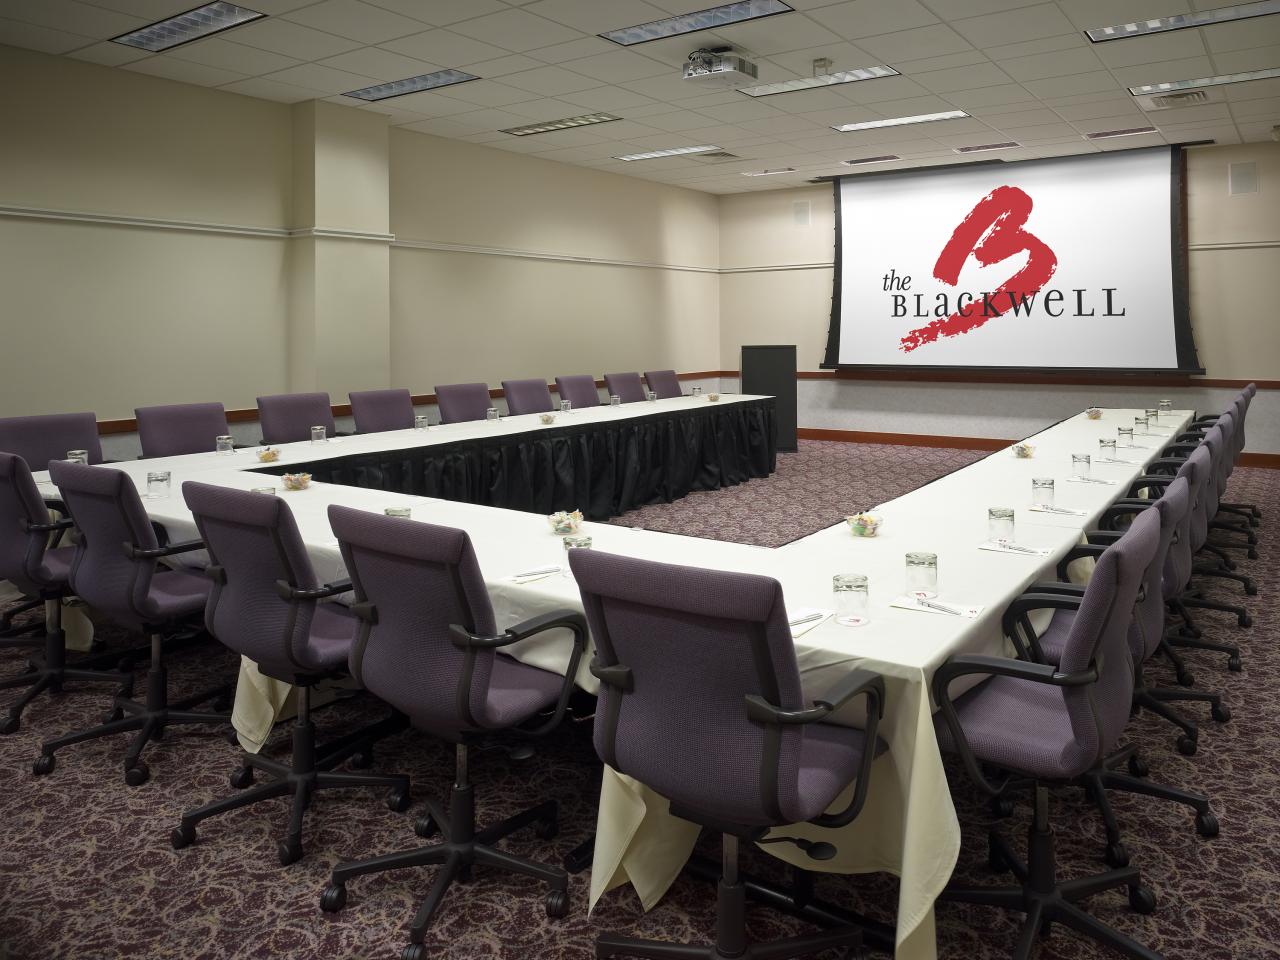 A conference room at the Blackwell Inn and Pfahl Conference Center